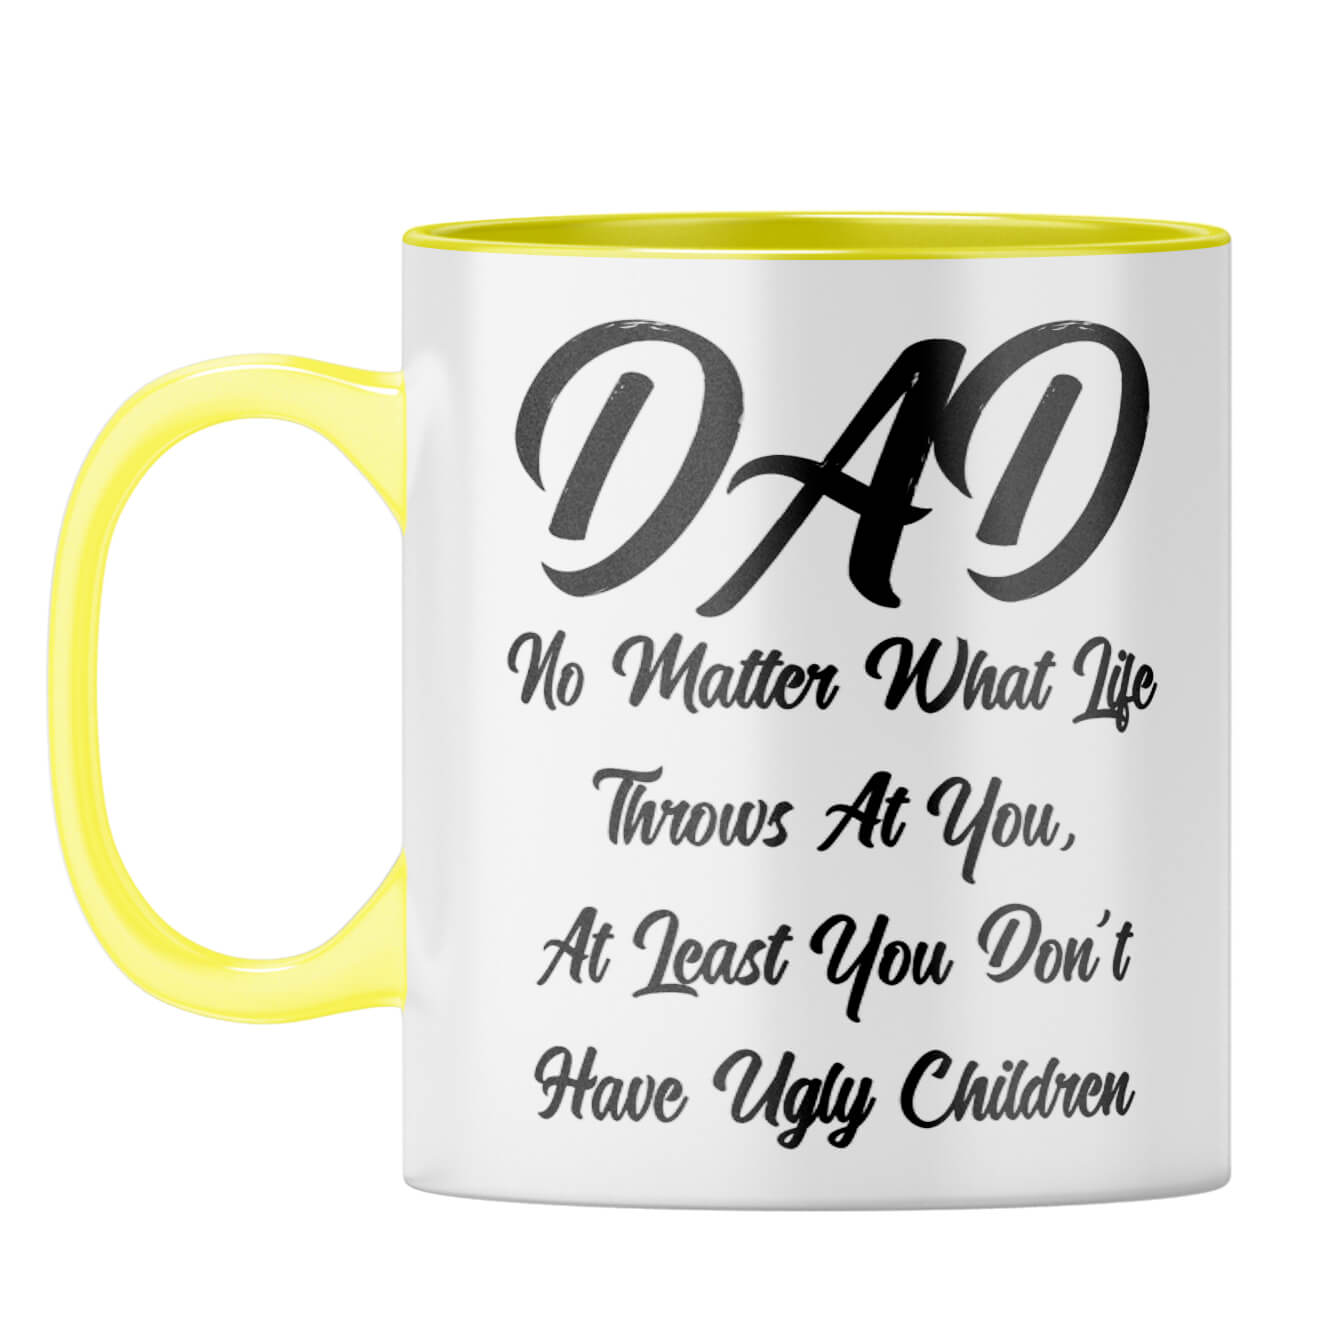 Dad Doesn't Have Ugly Children Coffee Mug Yellow